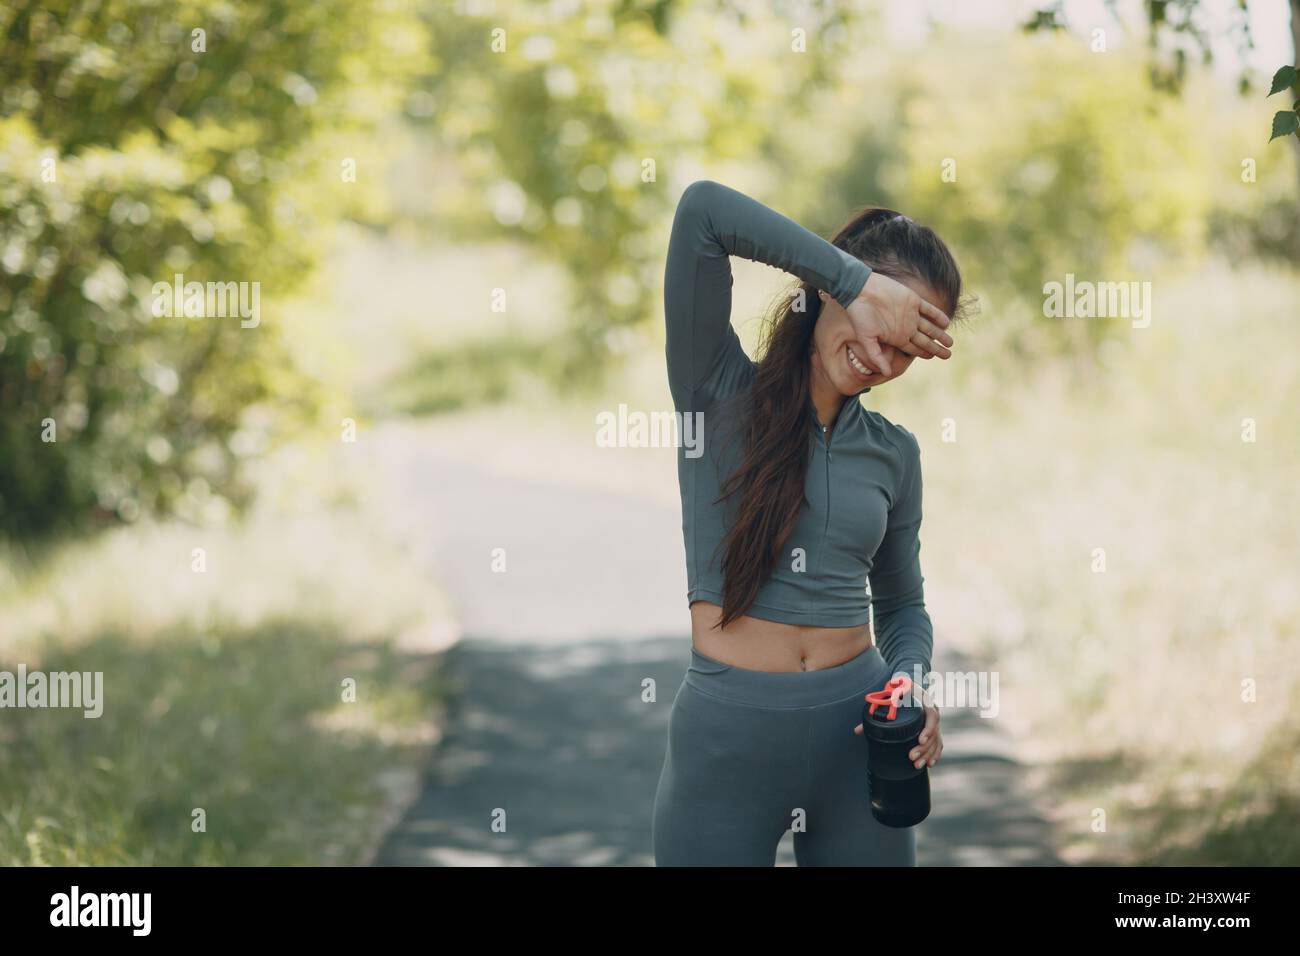 Tired runner woman jogger drinking bottled water after jogging in park outdoor. Wet armpit and deodorant antiperspirant. Stock Photo